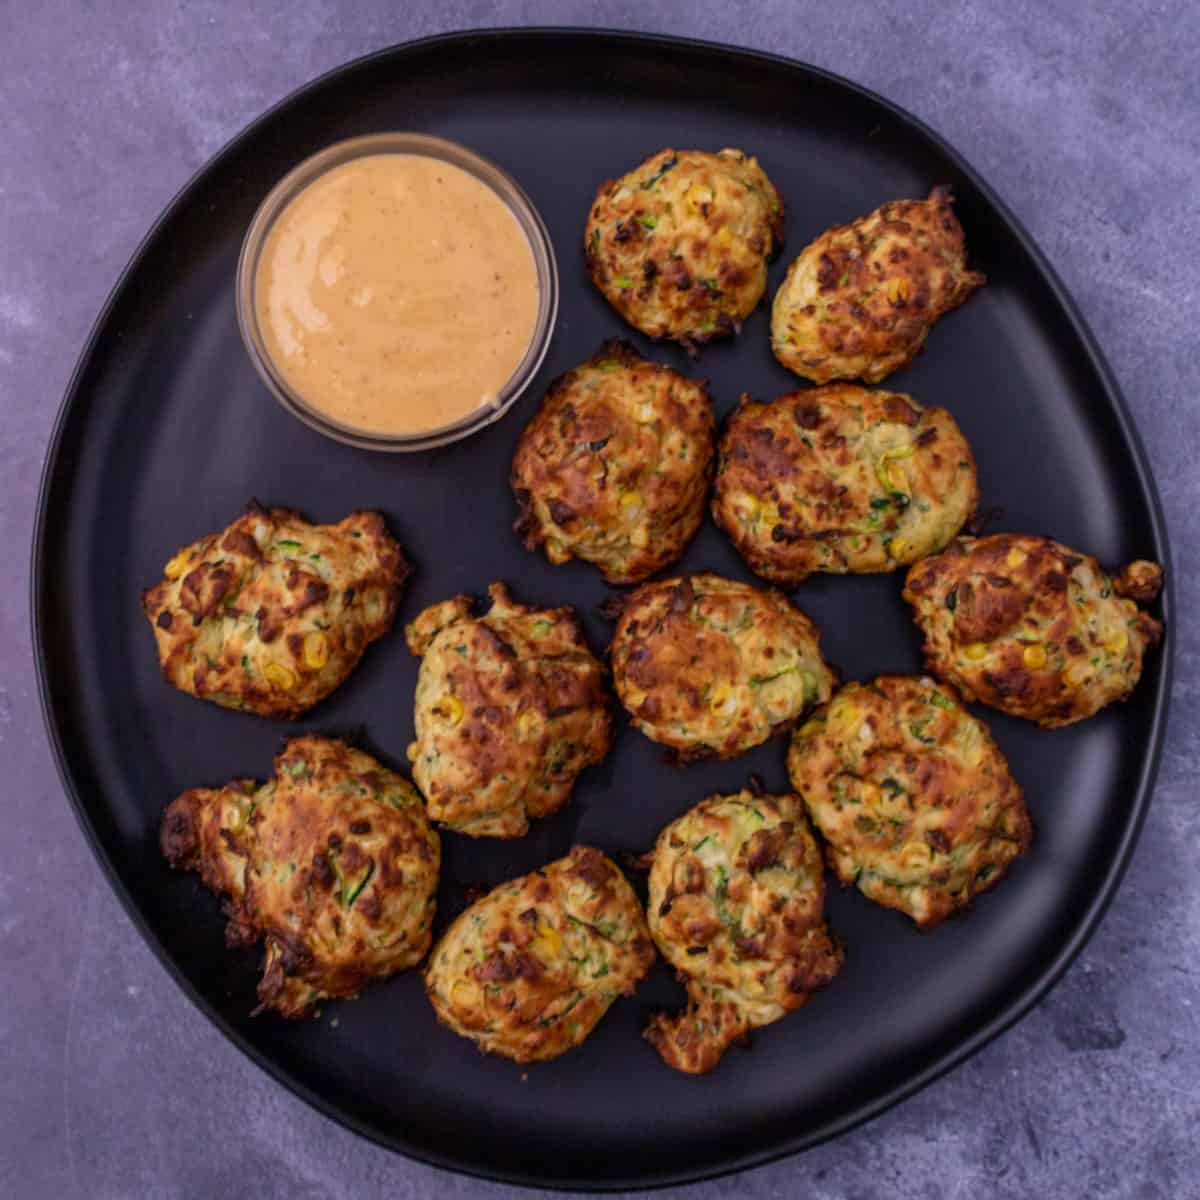 Zucchini fritters on a black plate with sriracha mayo to dip.